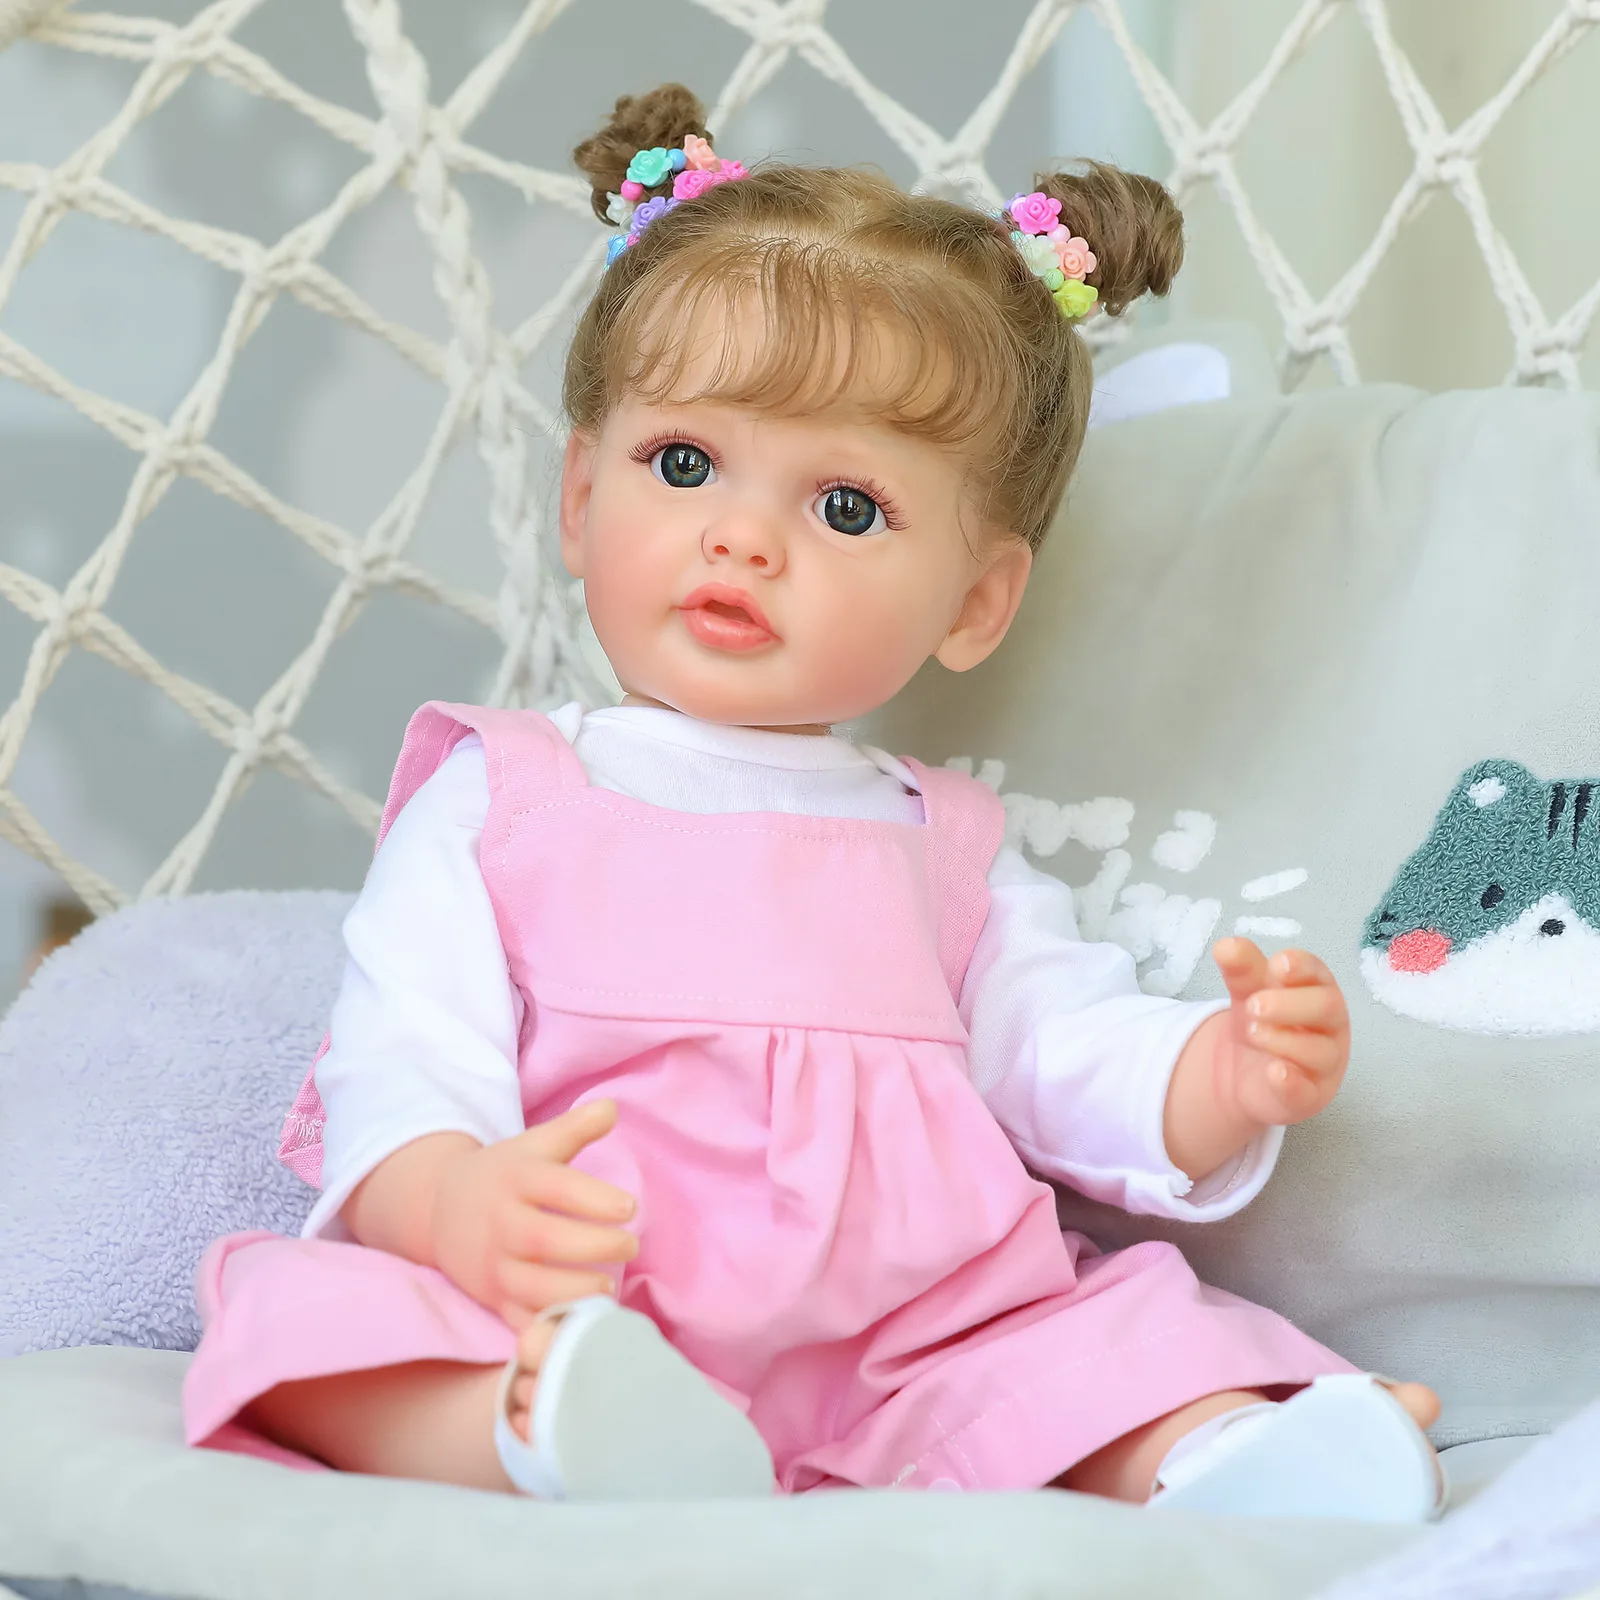 Finished Bebe Reborn Doll 55CM Reborn Baby Full Body Soft Silicone Real Touch Doll Hand Painted 3D Skin Rooted Hair Gifts Child 22 full silicone reborn baby dolls realistic bebe girl reborn pink dress rooted smooth hair child doll gift alive bonecas rebor